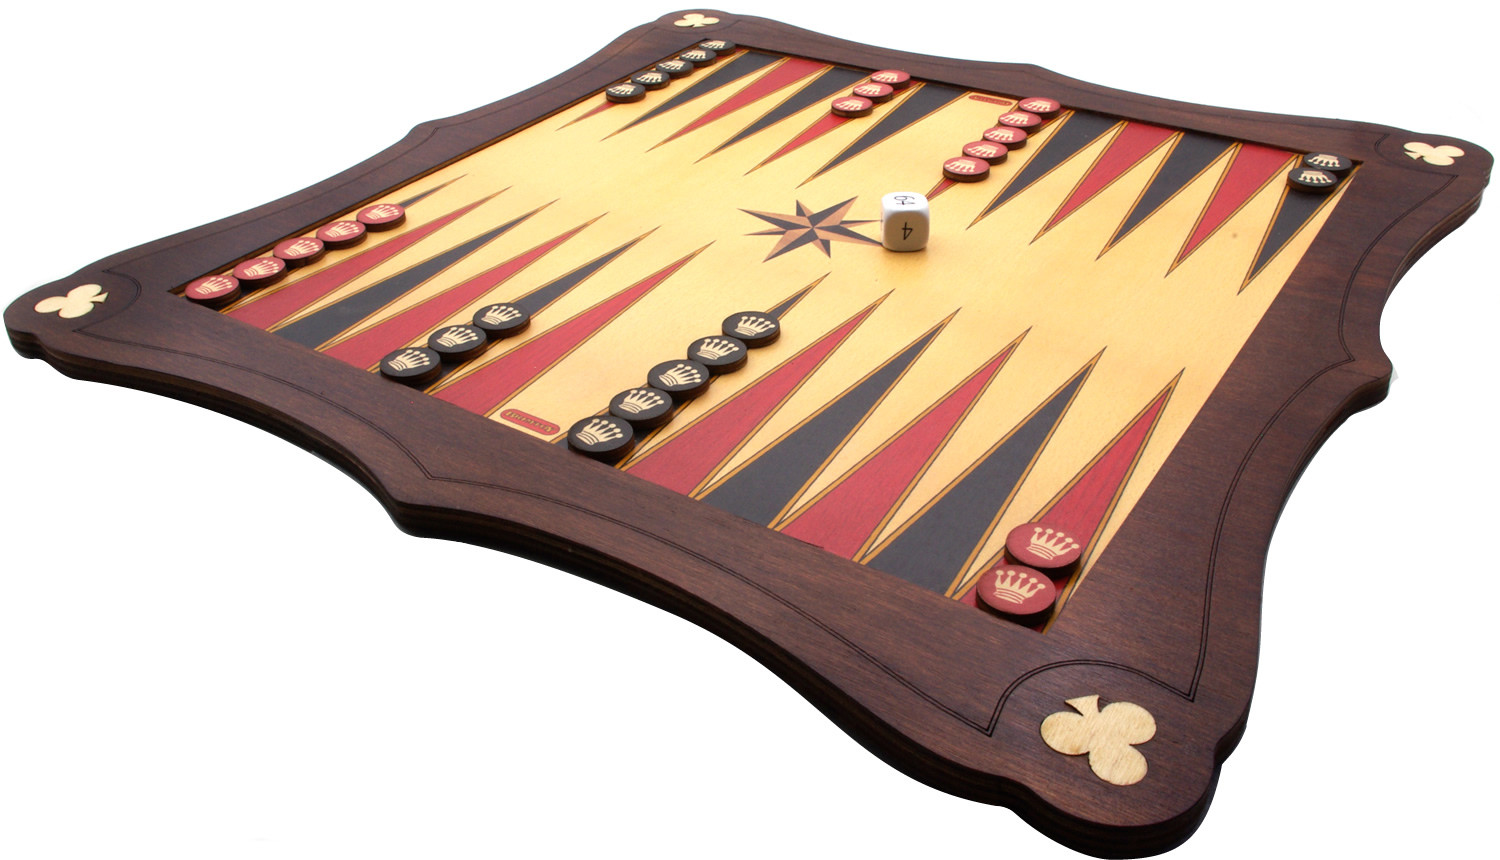 40cm (15") wooden Backgammon board with wooden stones, dice & doubling dice